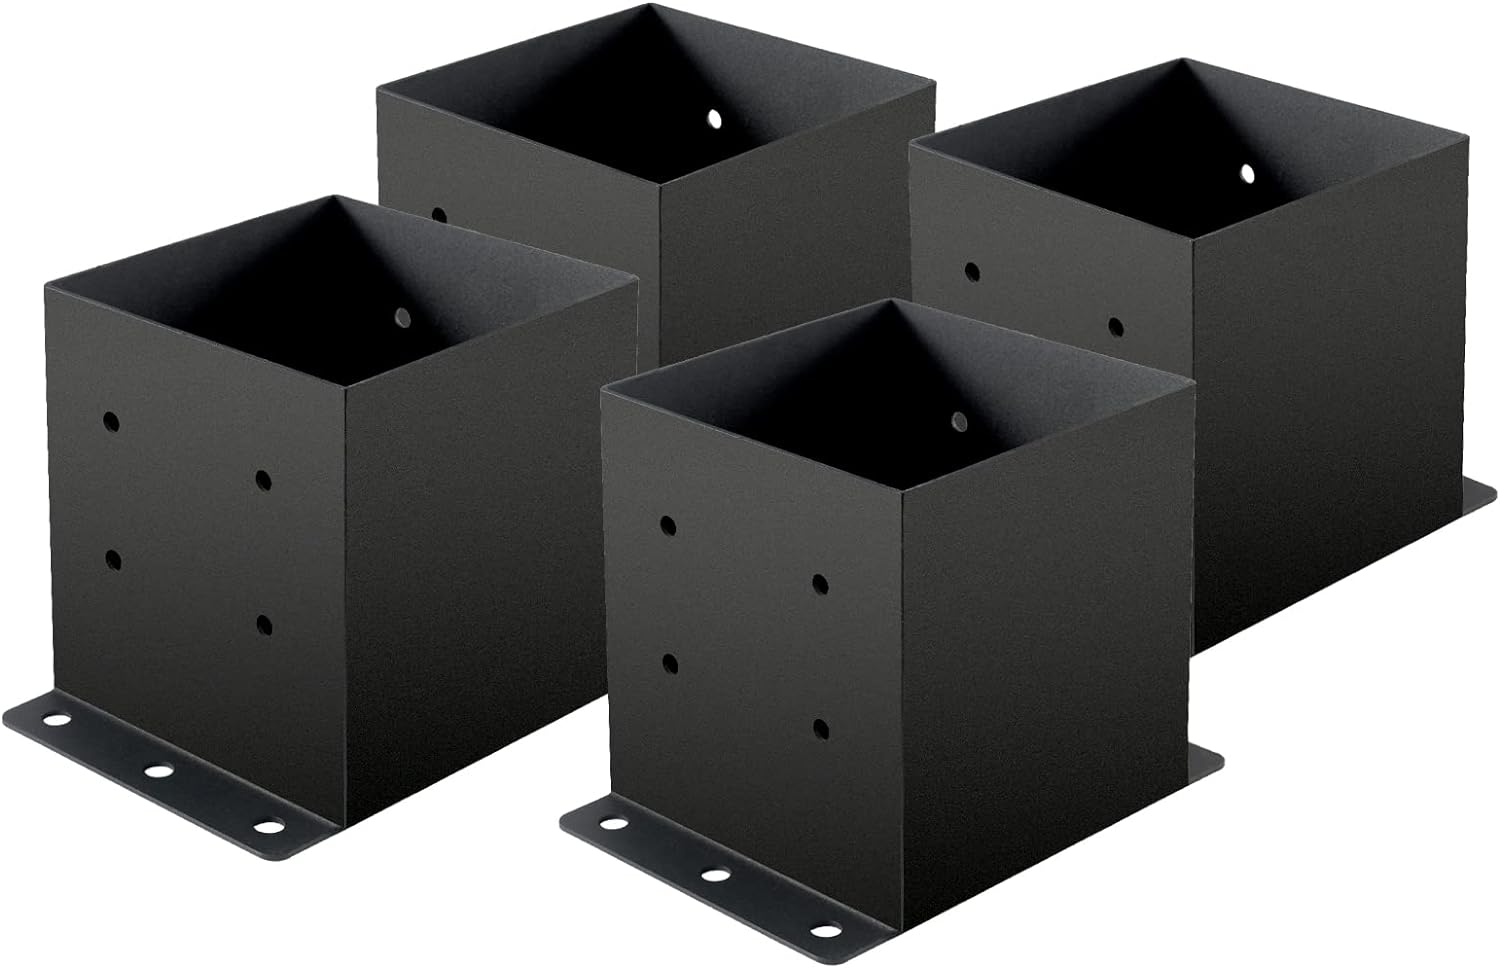 AXWHYS 6x6 Post Base 4 Pcs, (Inner Size 5.6x5.6) Post Brackets, Heavy Duty Black Metal Powder-Coated Thick Steel Post Anchor Outdoor f